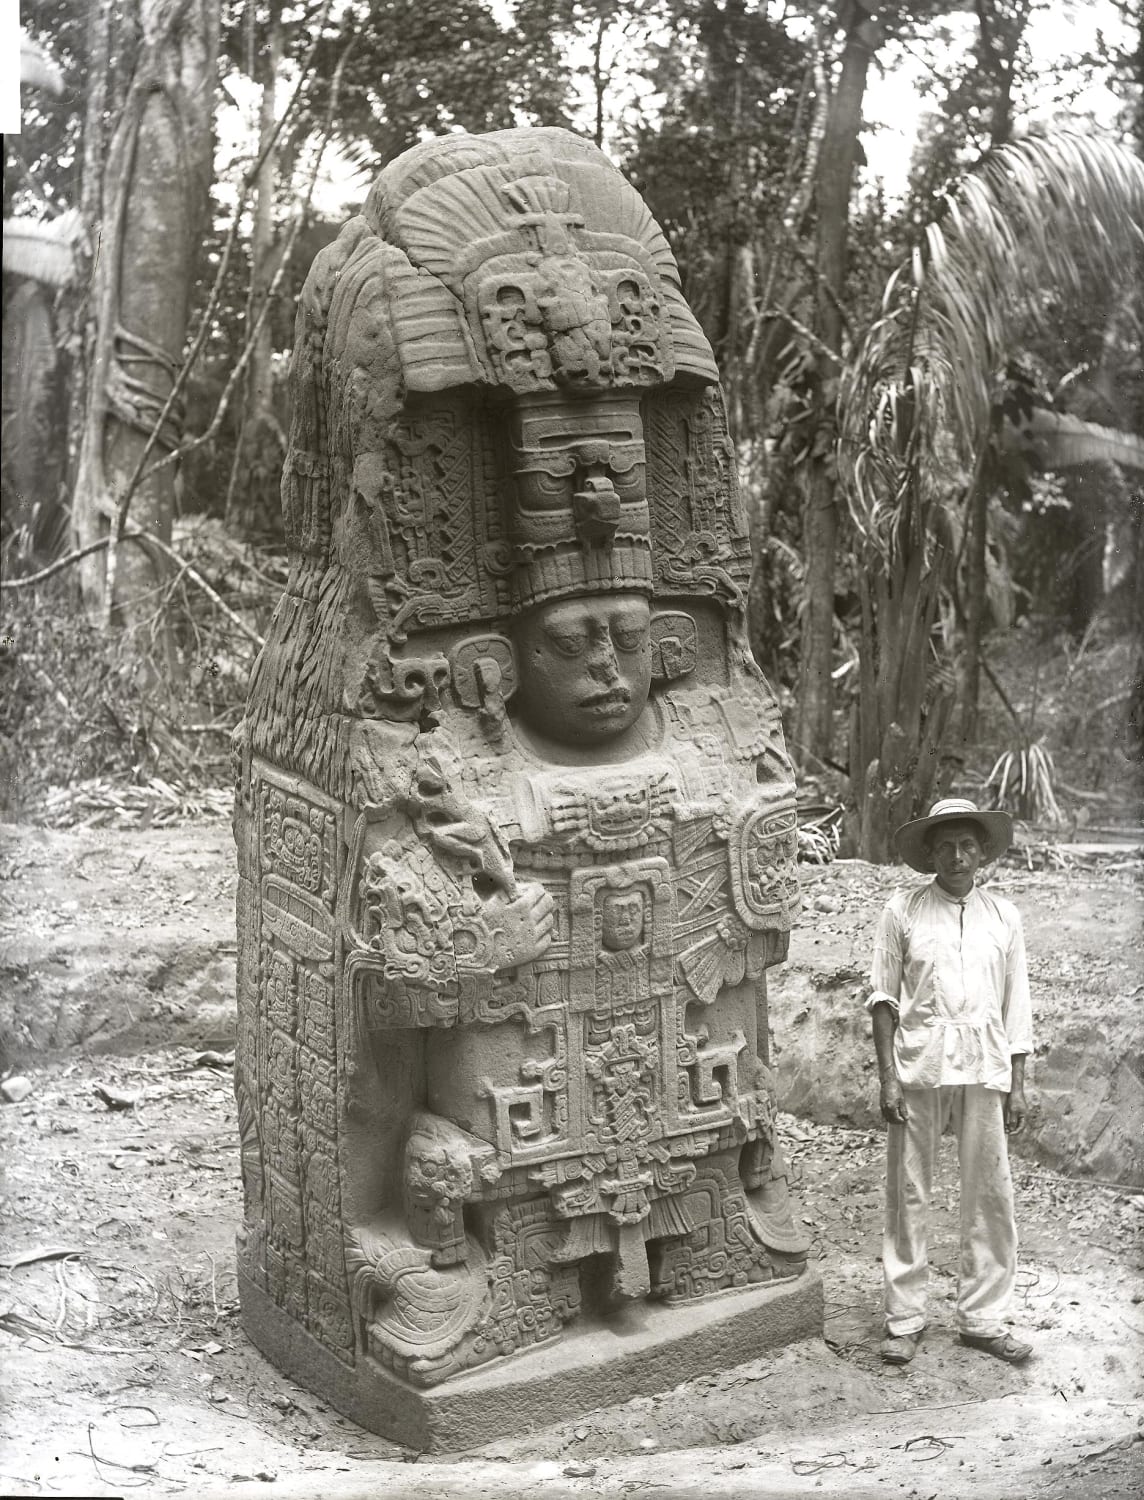 An old photo, taken by Alfred Percival Maudslay in 1894, of a man standing next to Stela K, a Maya stone monument carved in 805 CE and located near the eastern border of the Great Plaza in Quiriguá, Guatemala